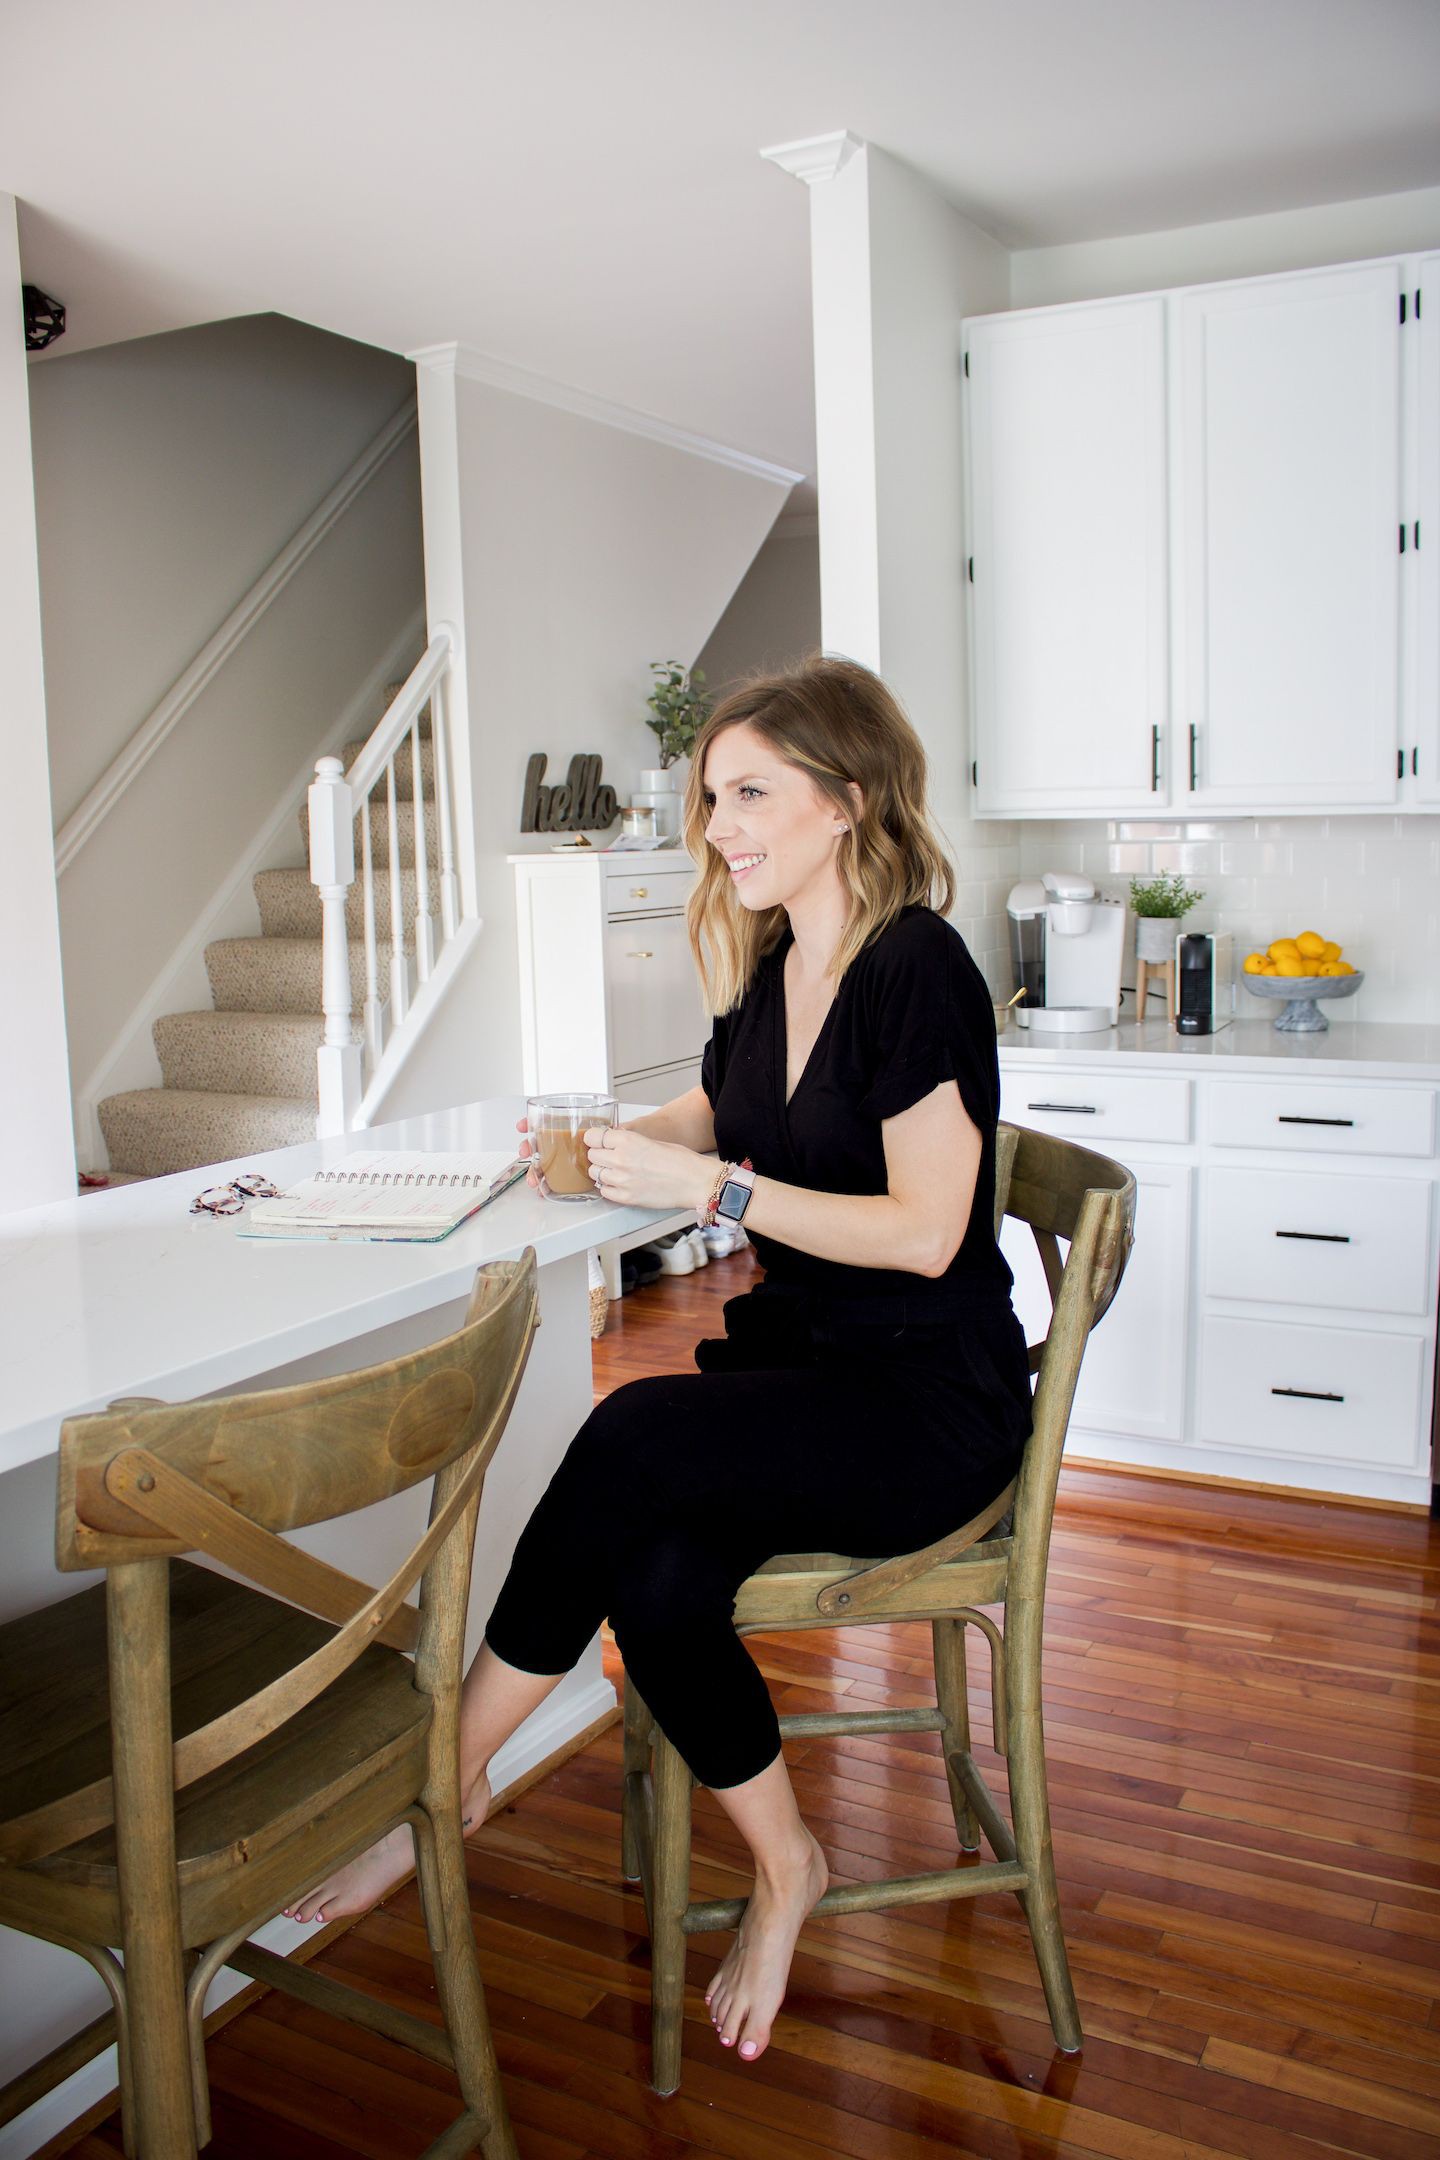 My Week of Outfits: Interior Designer Chrissy McDonald | The Everygirl